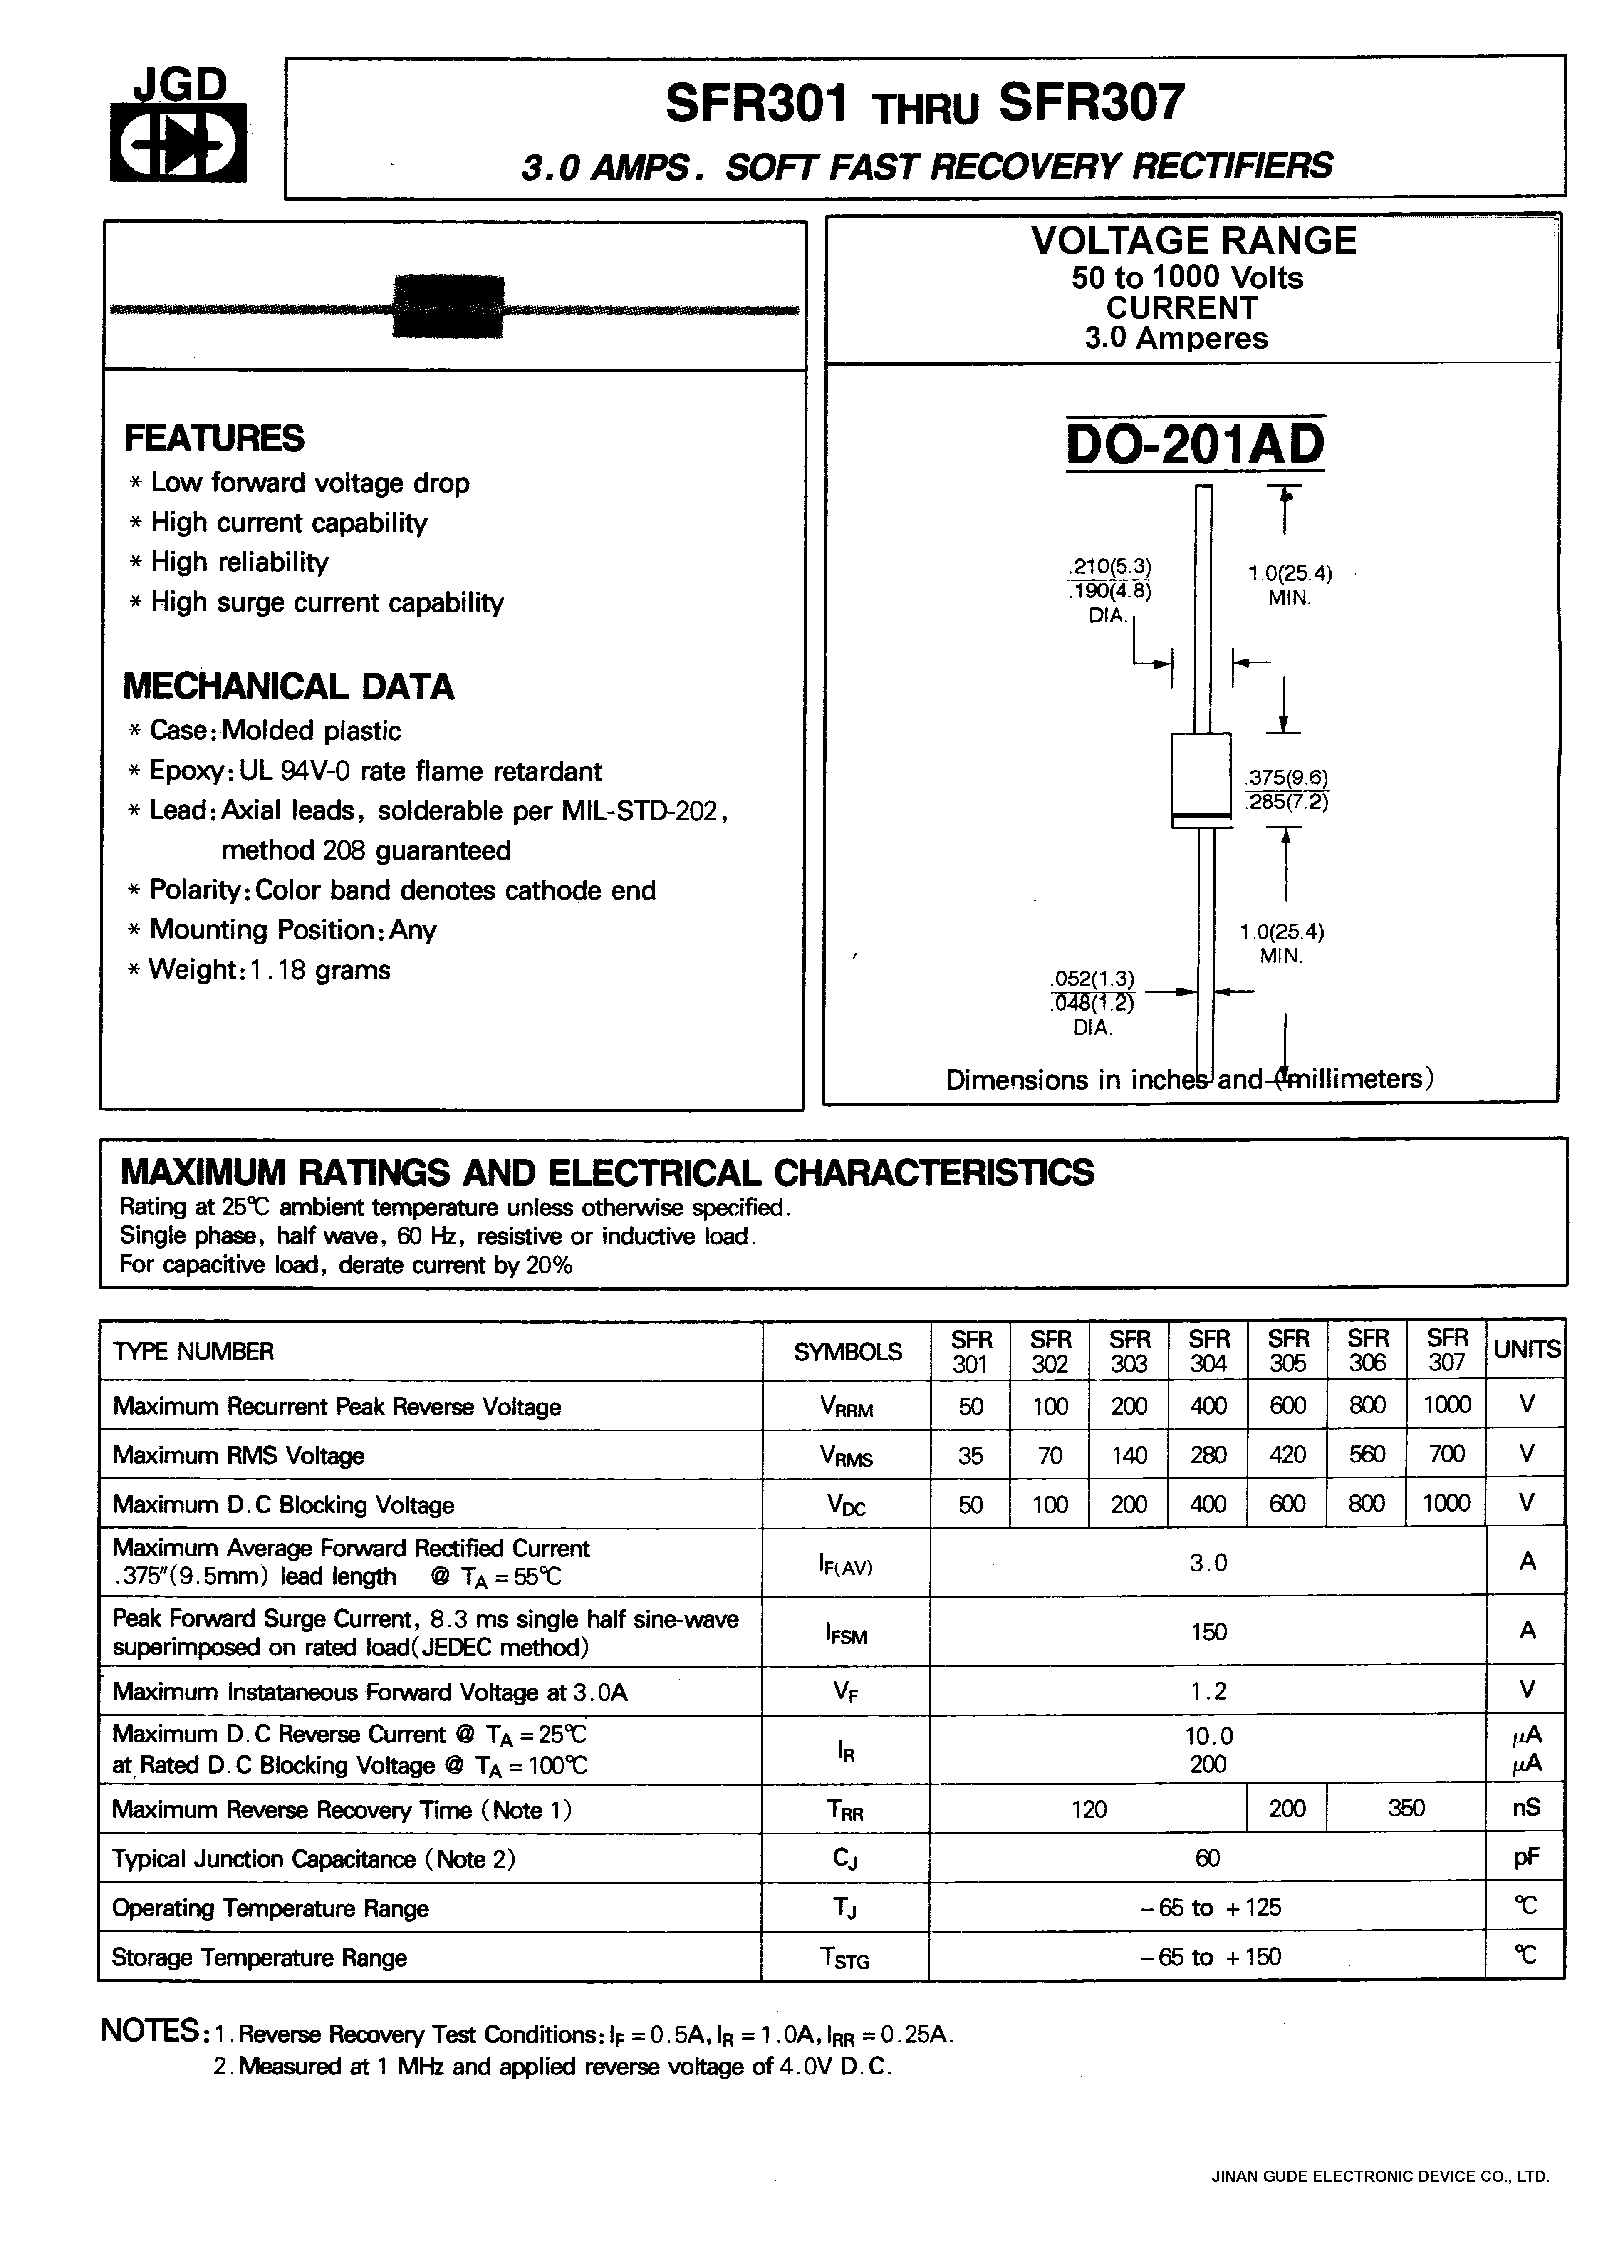 Datasheet SFR303 - 3.0 AMPS. SOFT FAST RECOVERY RECTIFIERS page 1